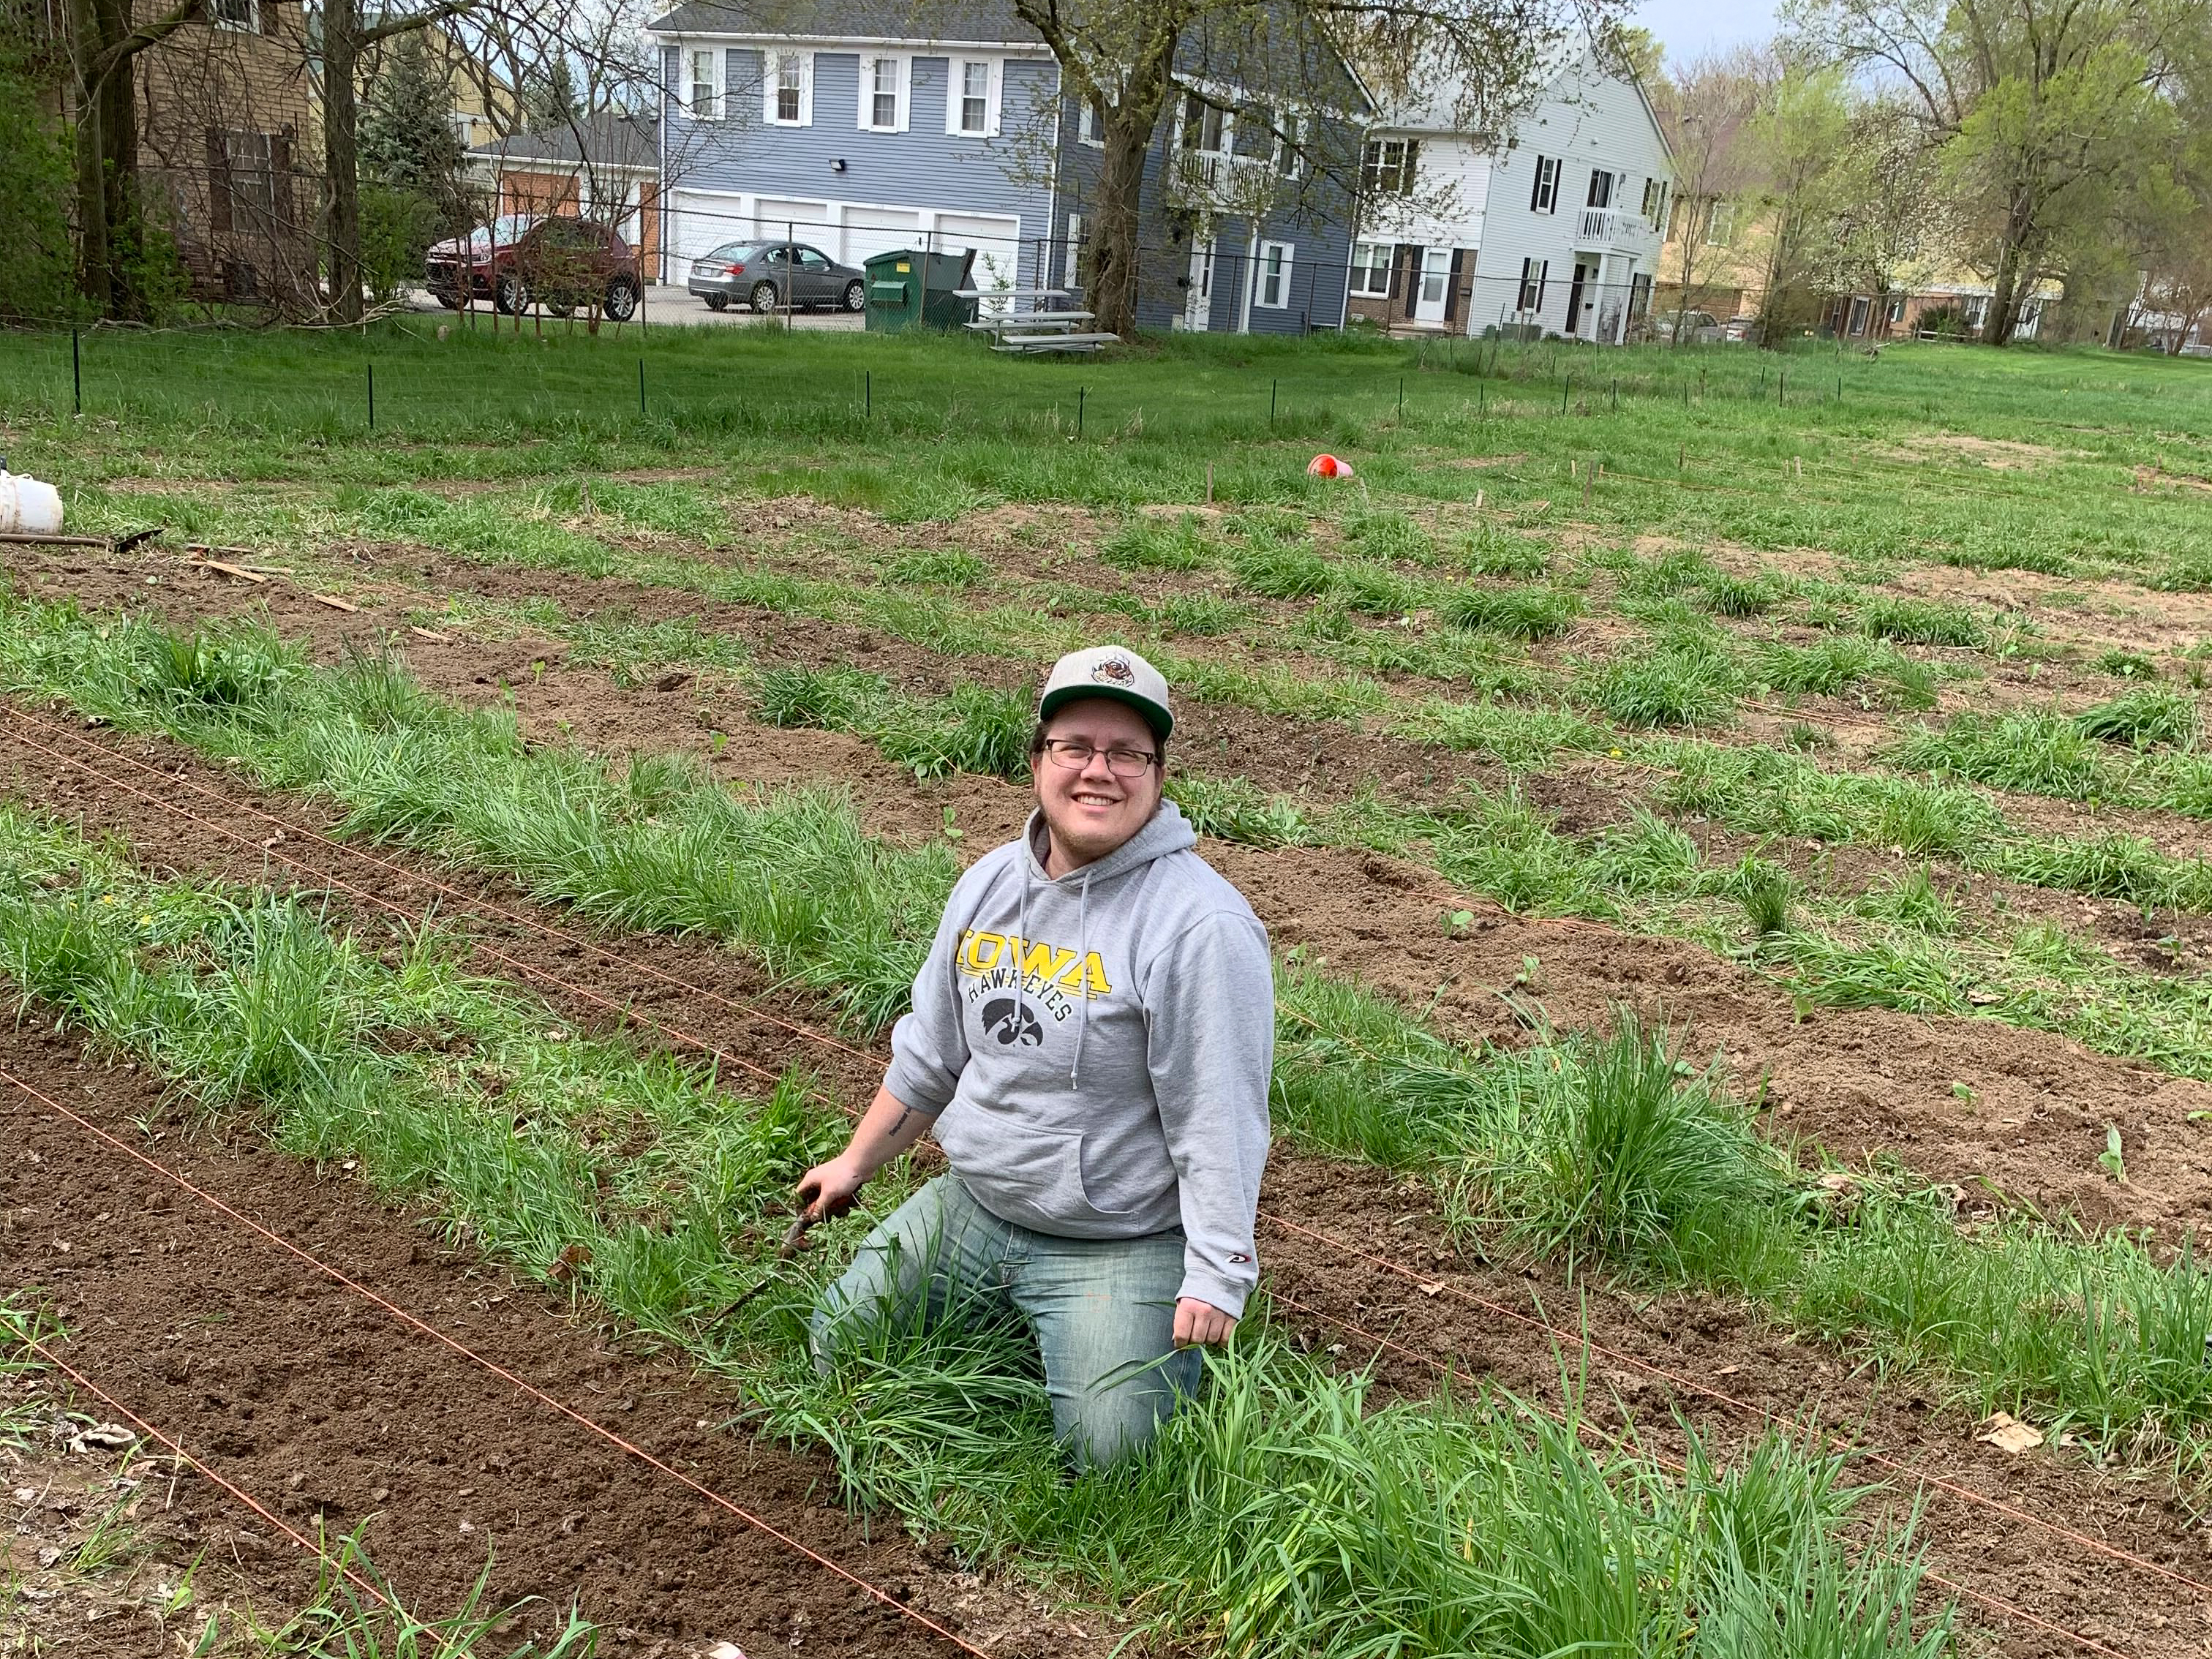 Finn Bell crouched down on the ground preparing soil for planting on a cloudy spring day